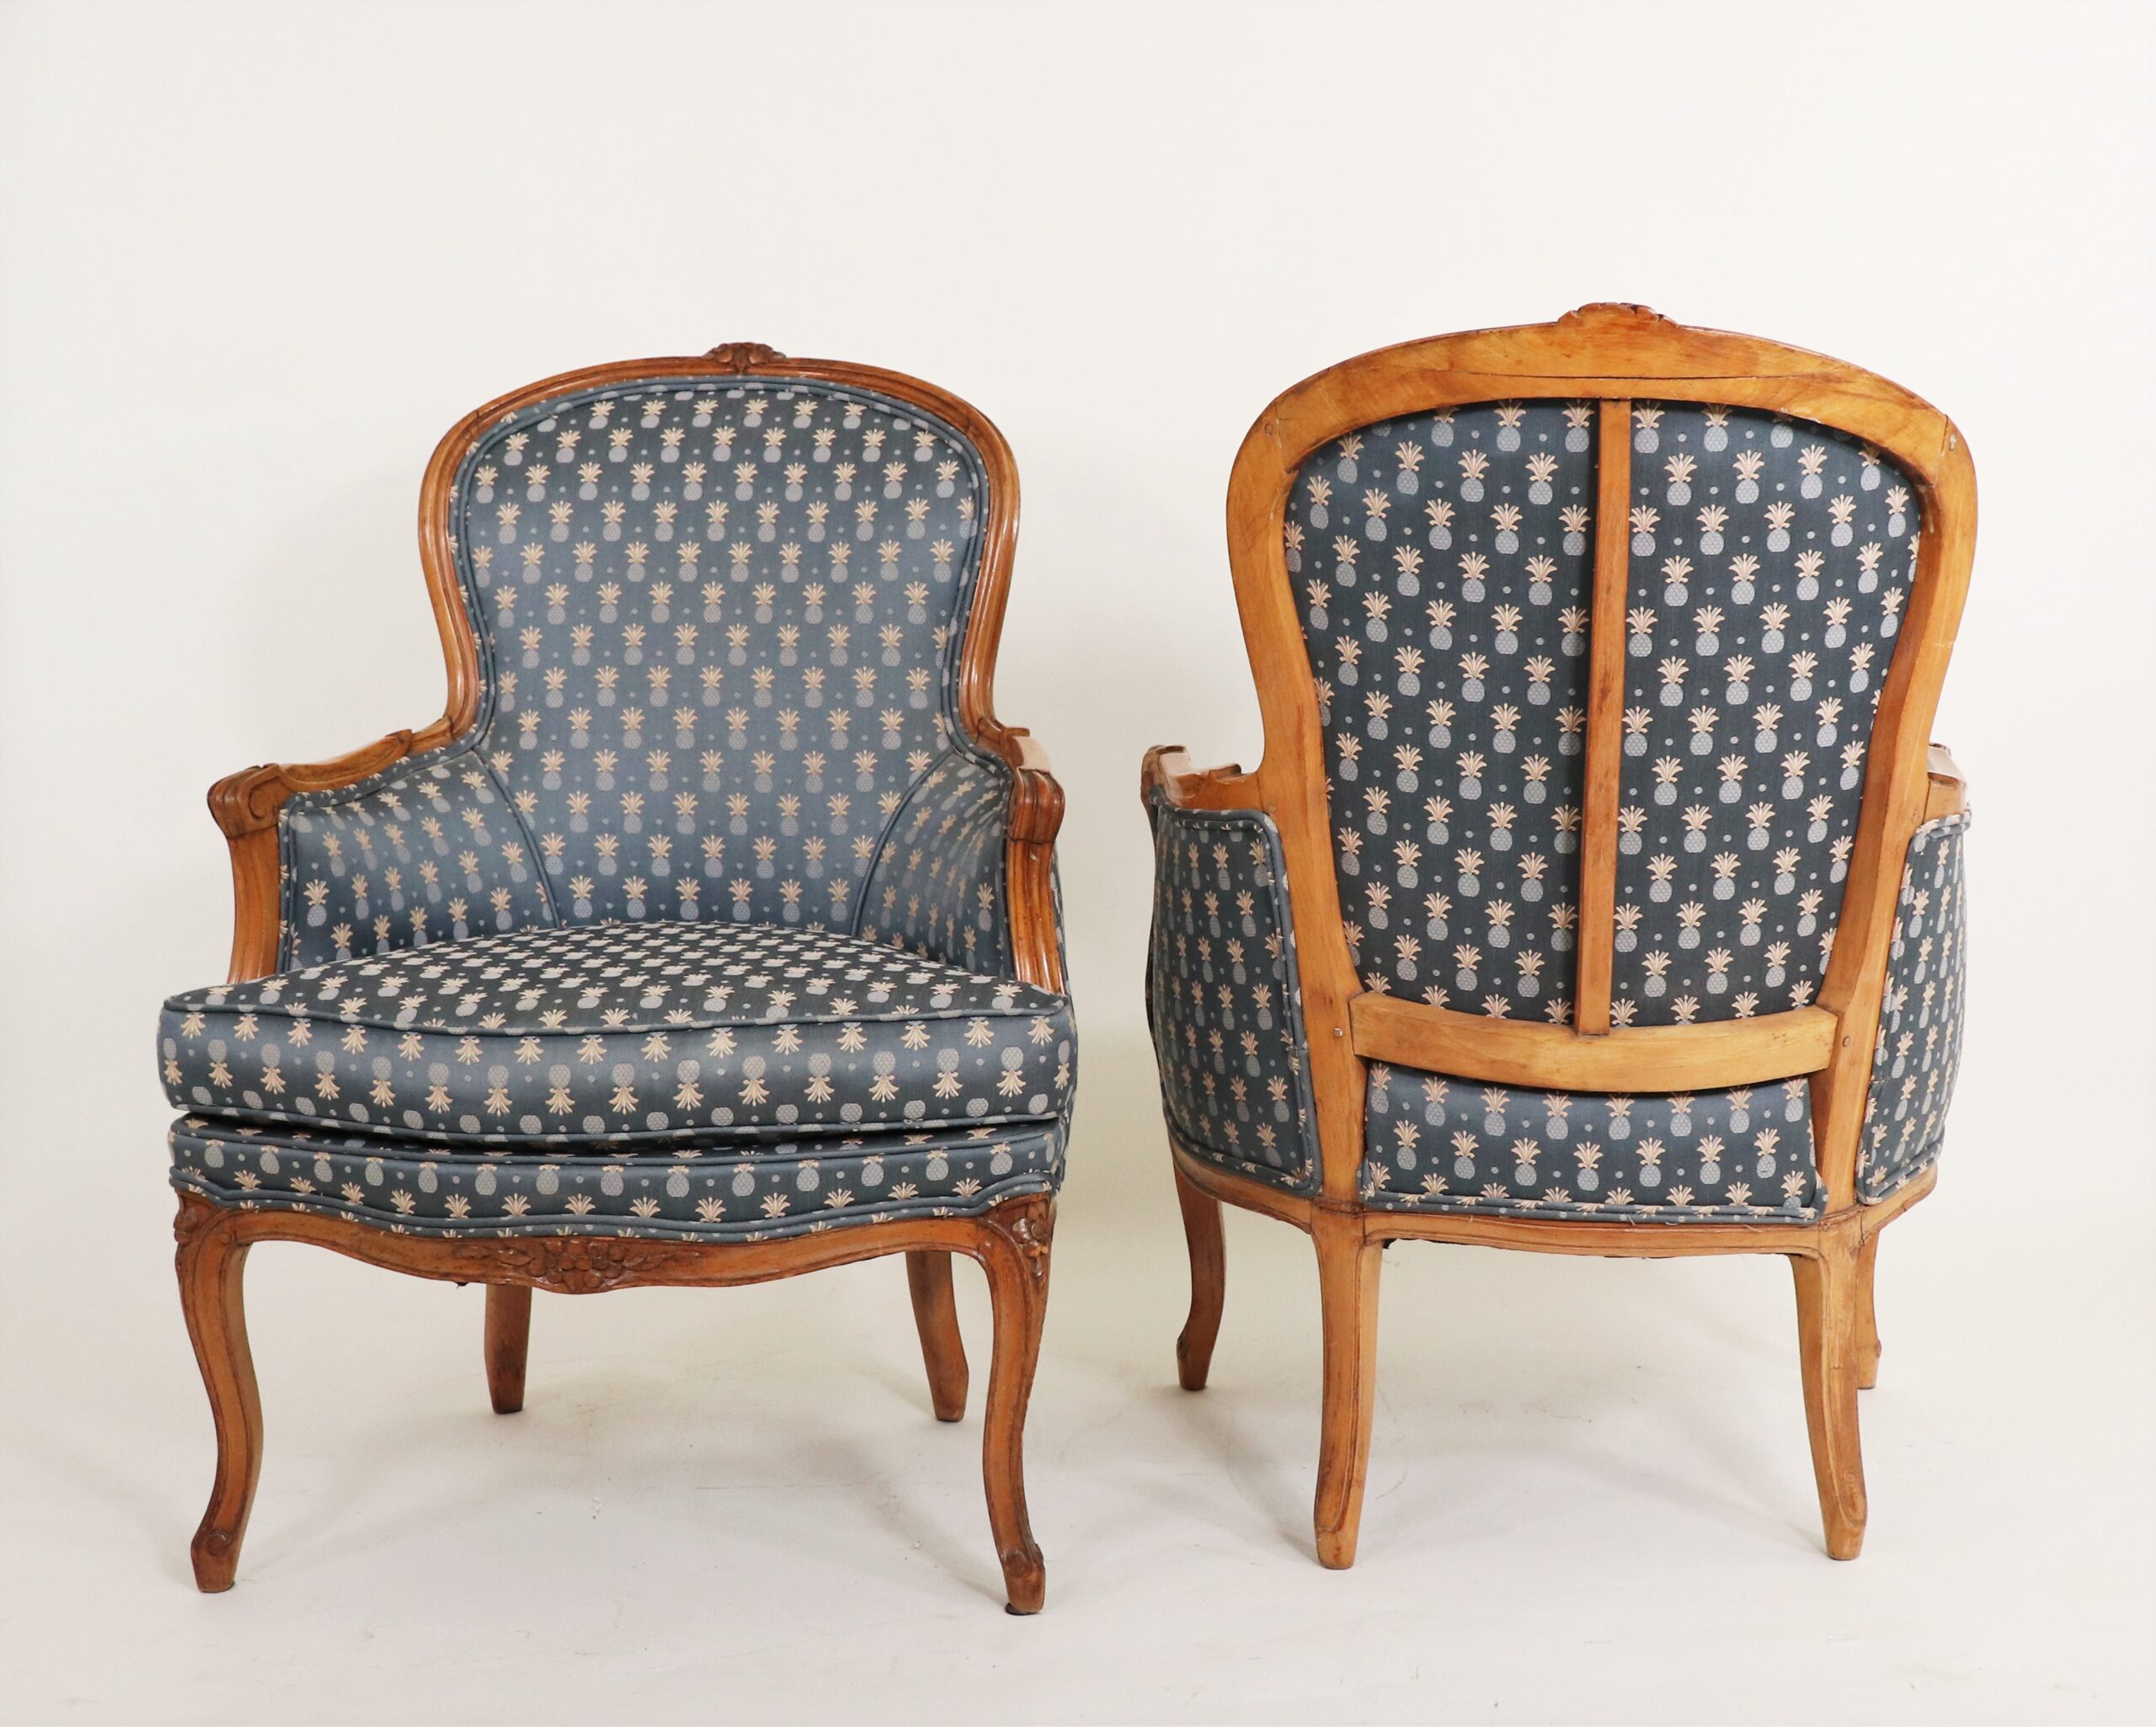 Vintage Rococo Louis XV French Tortoise Wood Bergere Chairs - a Pair